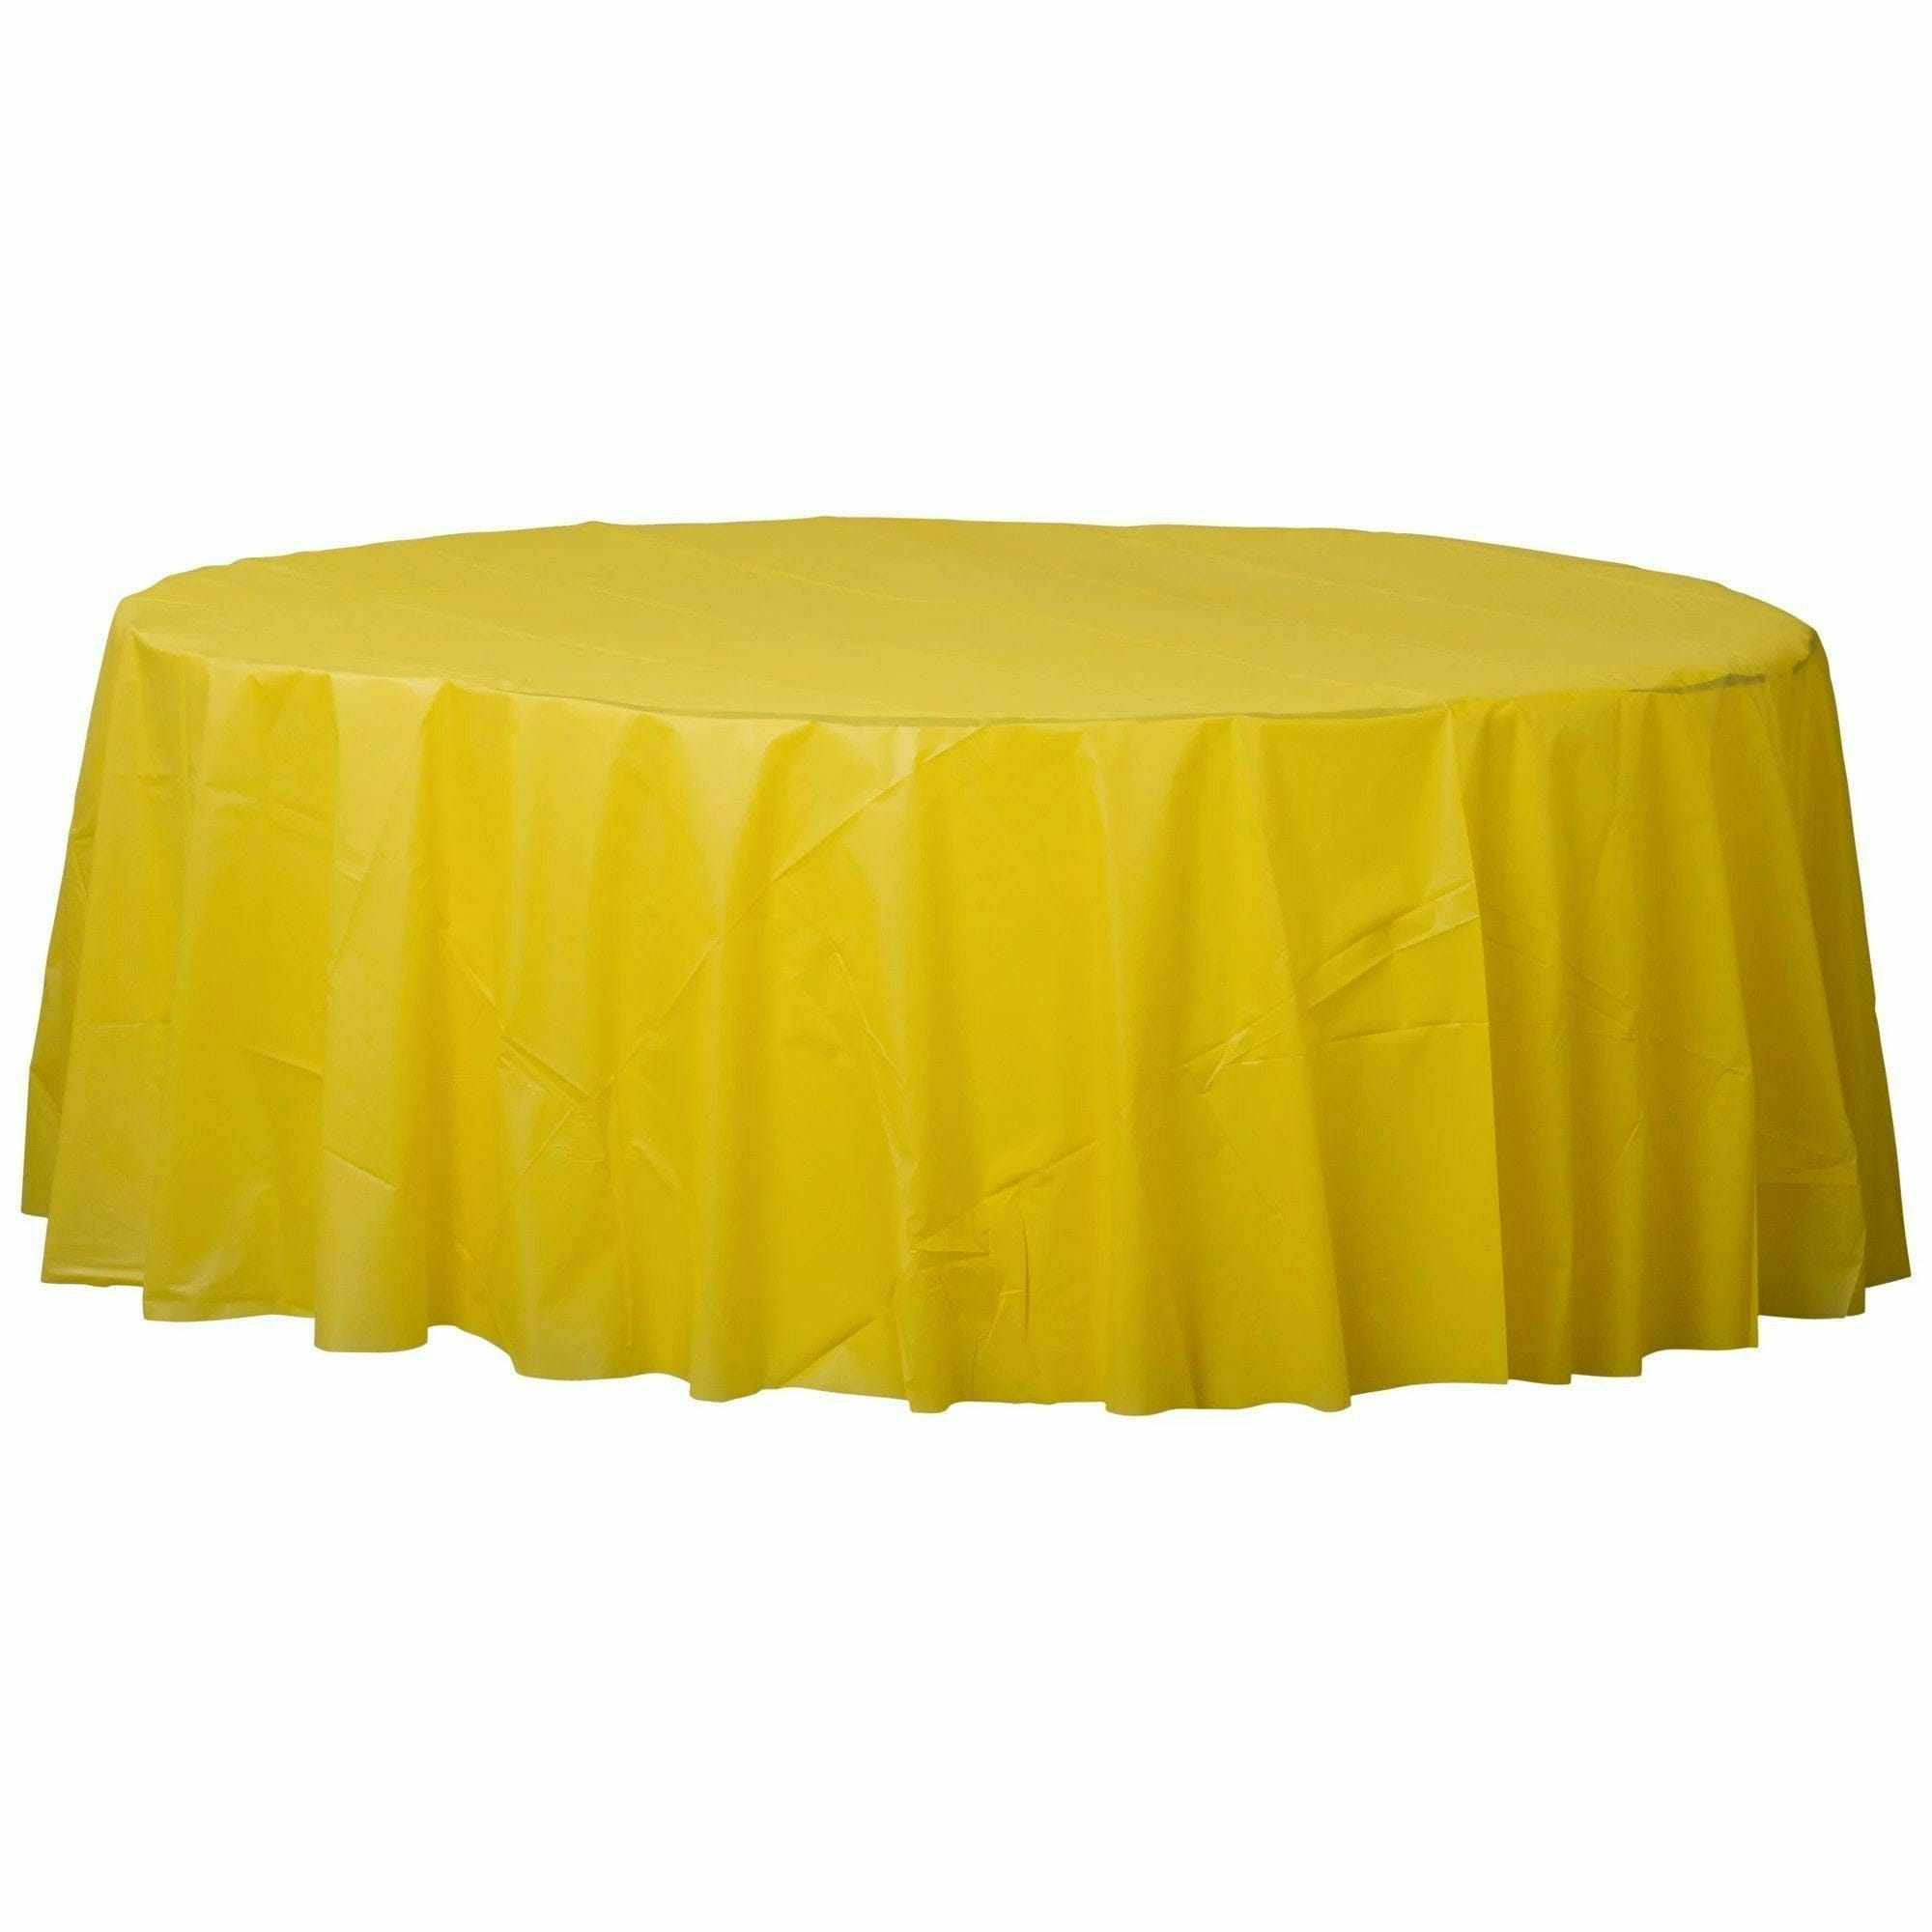 Amscan BASIC Yellow Sunshine - 84" Round Plastic Table Cover